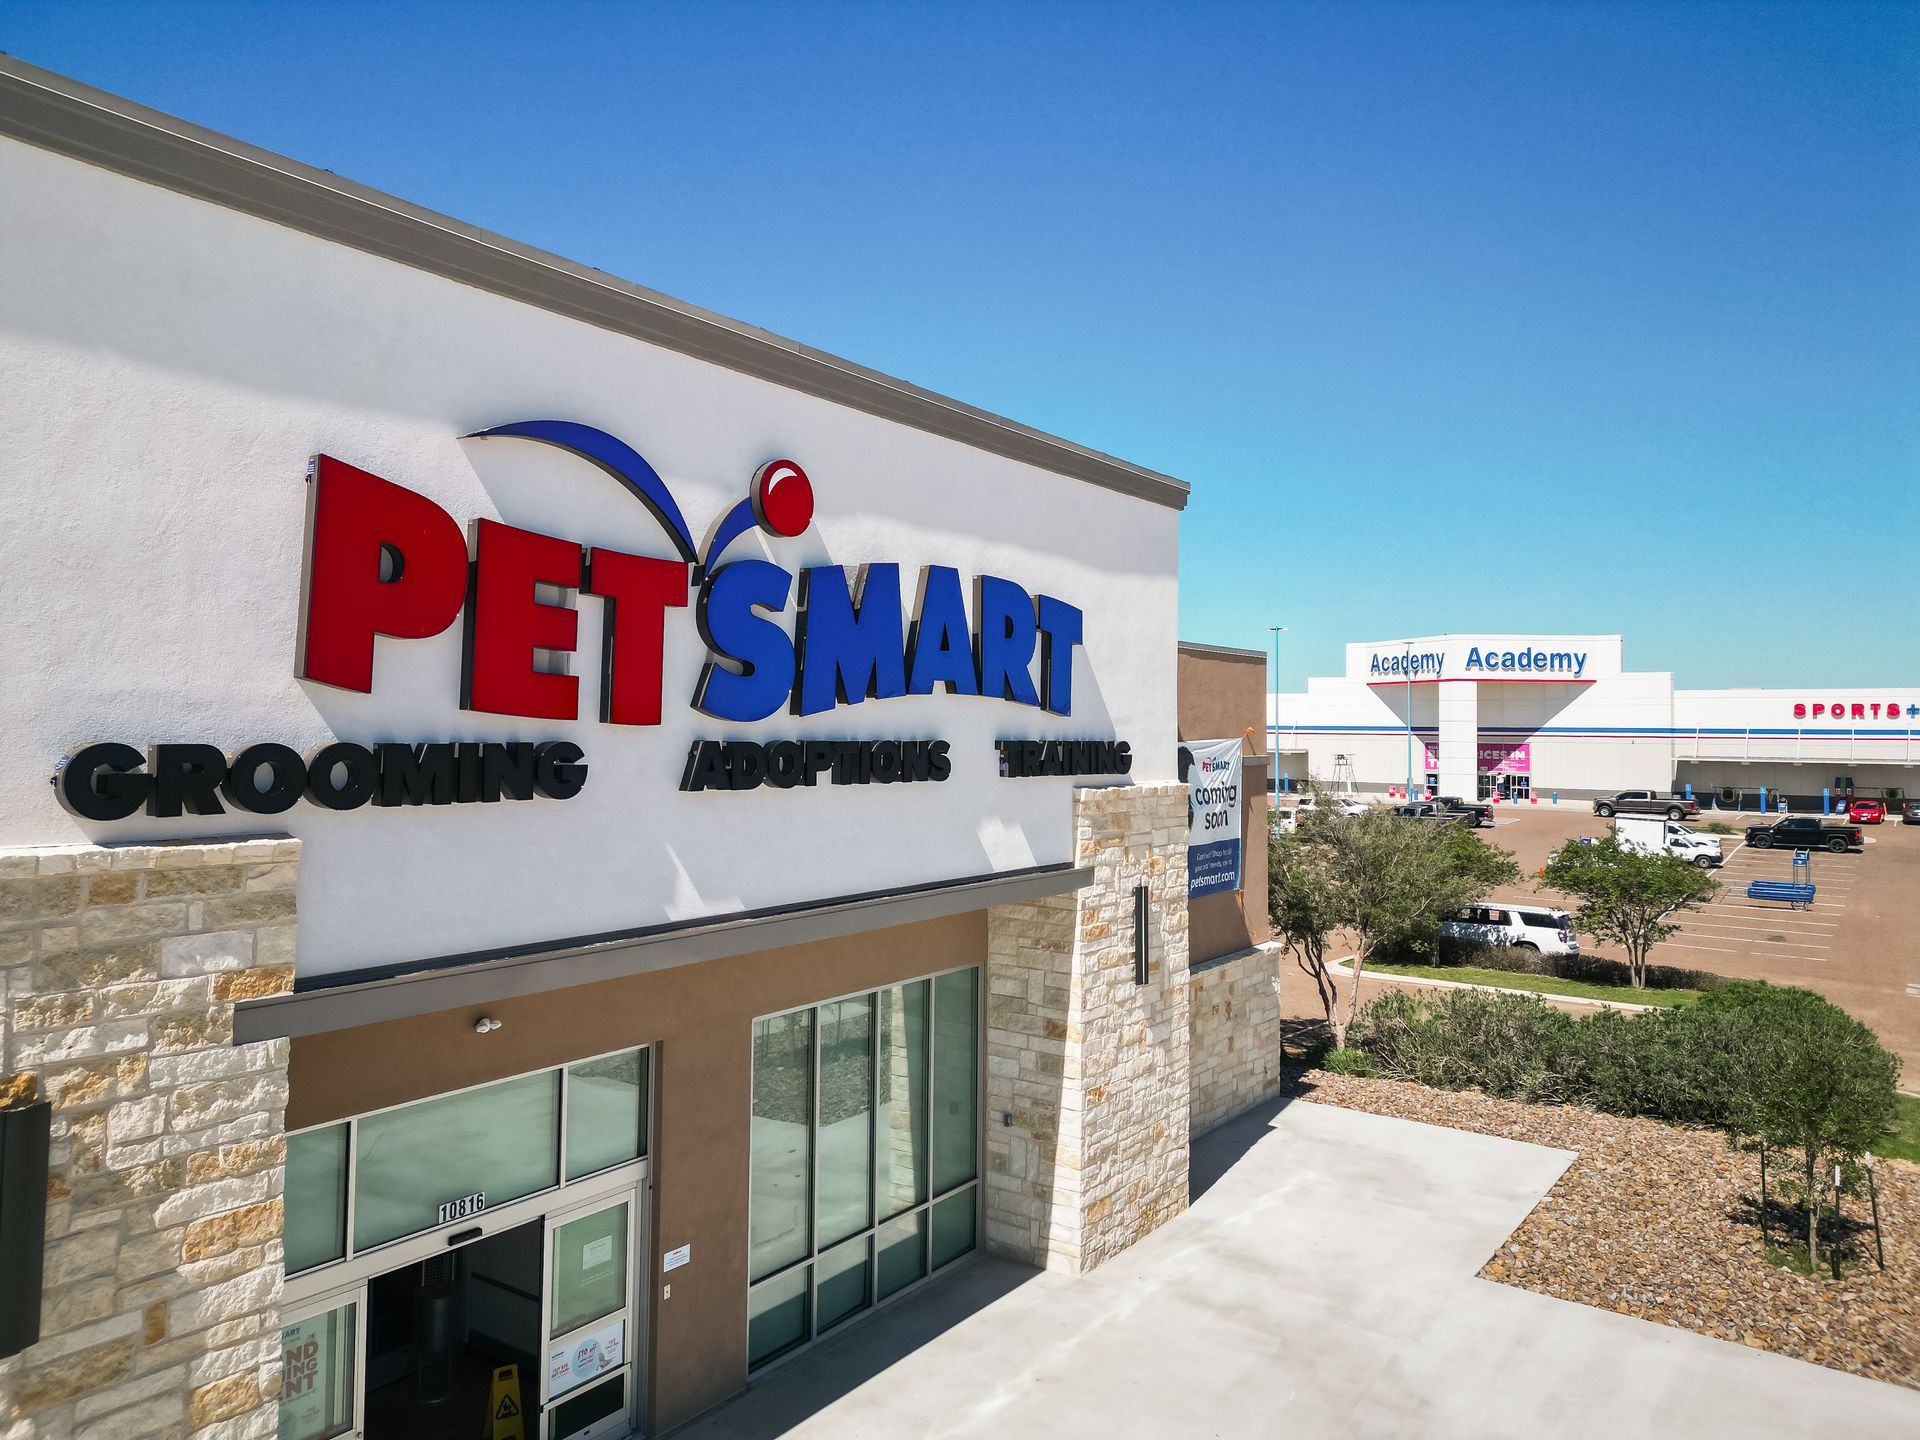 Quantum Building Services finishes construction on new facility for PetSmart in Laredo, Texas.